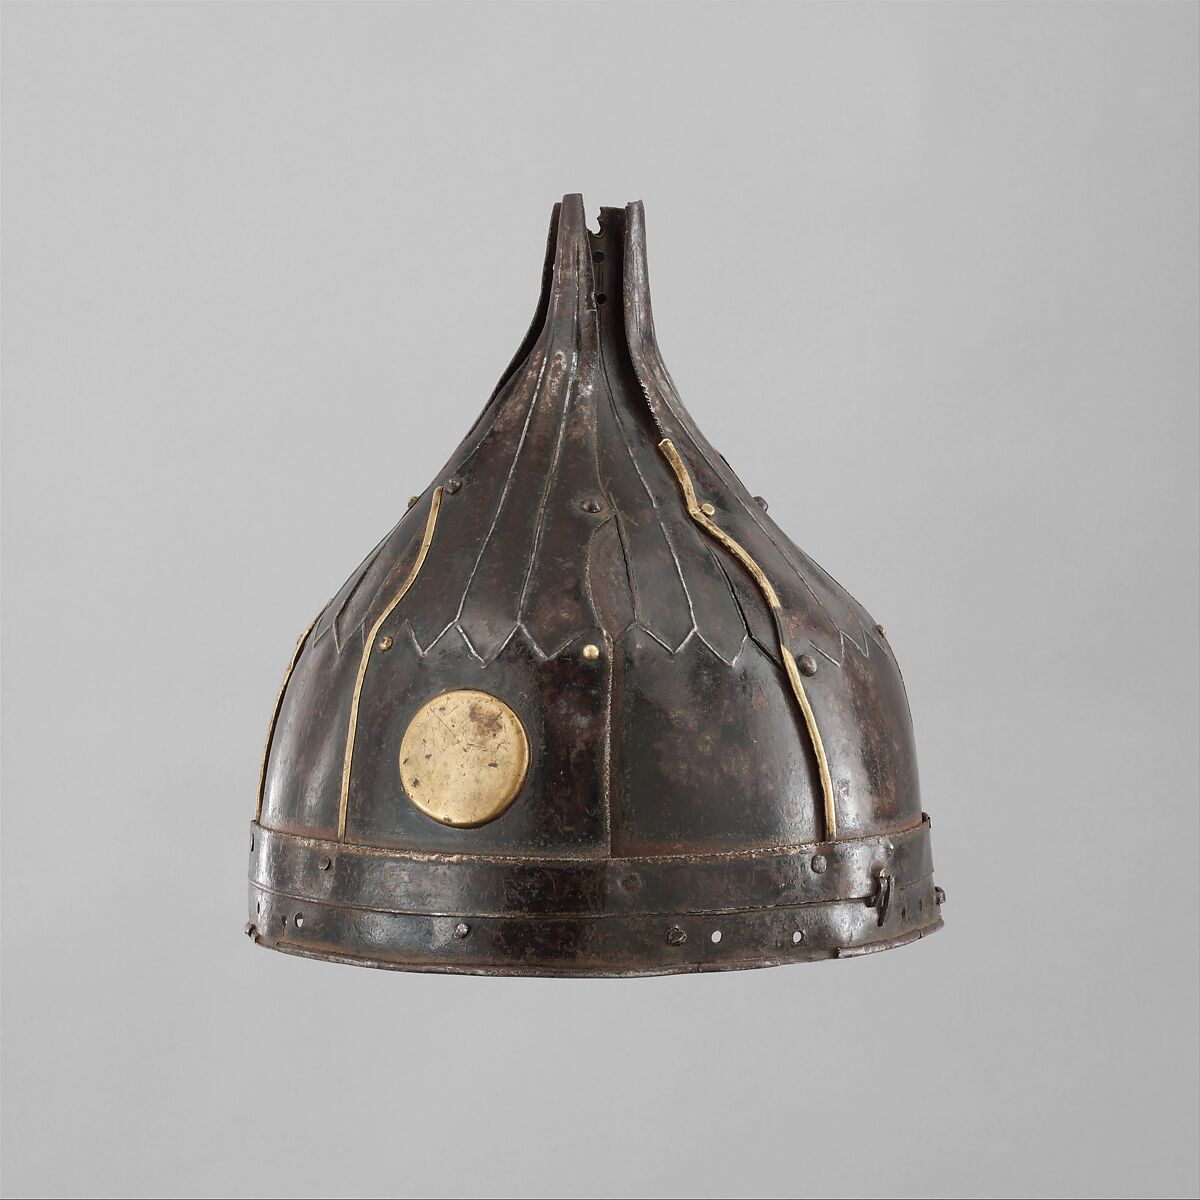 Helmet, Iron, brass or copper alloy, possibly Iranian or Central Asian